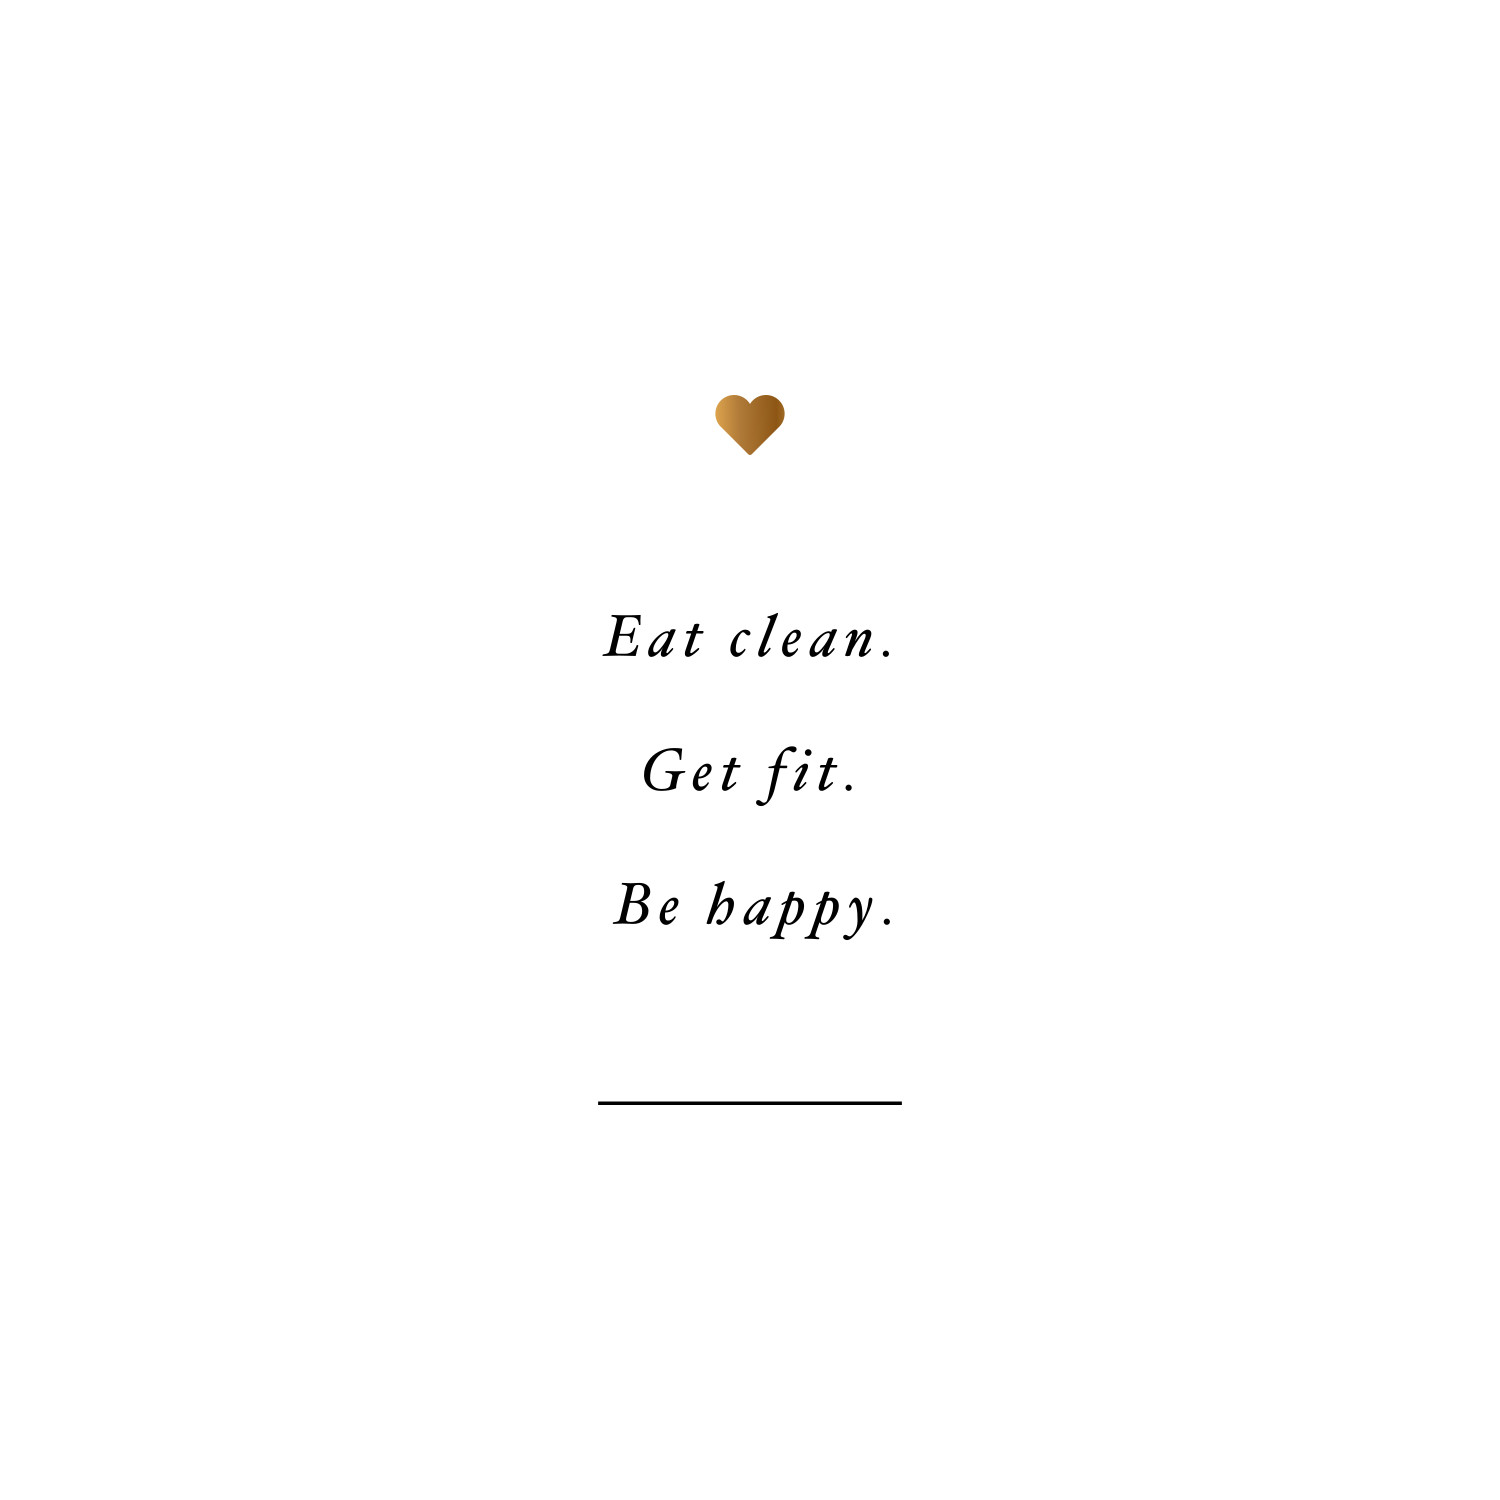 Be happy! Browse our collection of motivational exercise quotes and get instant weight loss and training inspiration. Transform positive thoughts into positive actions and get fit, healthy and happy! https://www.spotebi.com/workout-motivation/be-happy-motivational-exercise-quote/